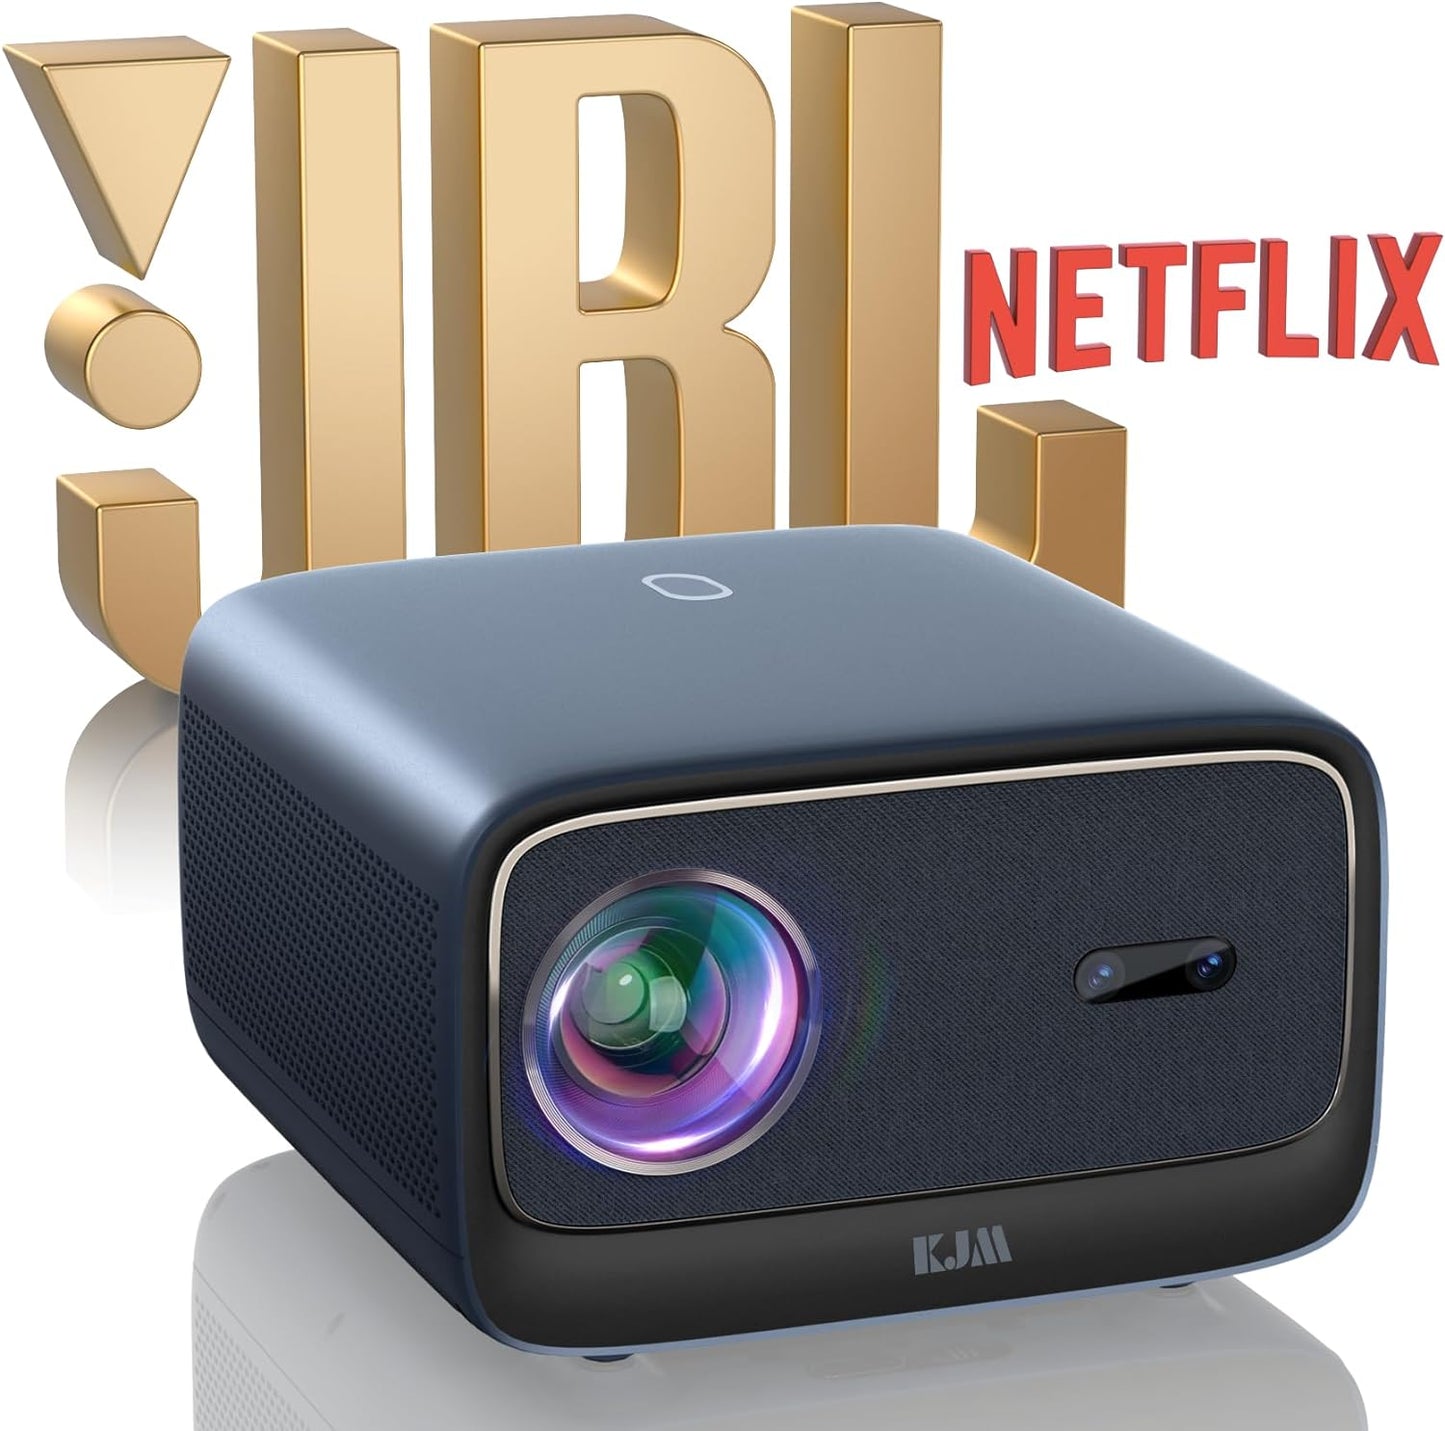 [Auto Focus/Keystone] Projector 4K with Netflix Officially-Licensed, KJM 1500 ANSI Native 1080P HD WiFi Bluetooth Projector, Outdoor Video Movie Projector with 24W Speakers, Sound by JBL, Dolby Audio